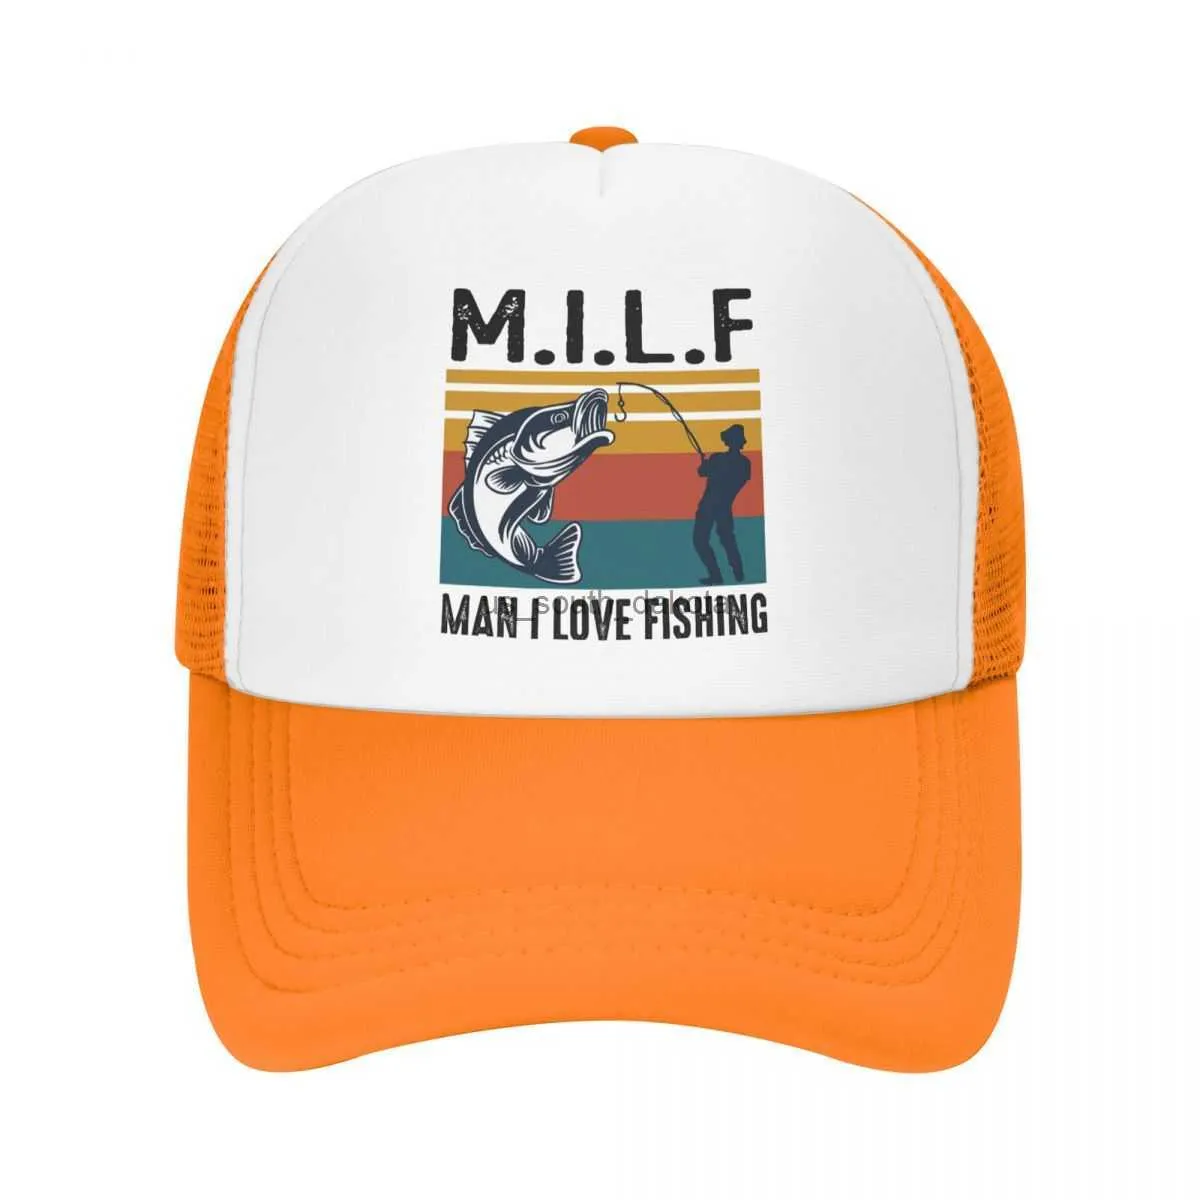 Milf Man I Love Fishing Funny Baseball Caps Adjustable Trucker Hat For Men  And Women Perfect For Outdoor Summer Activities From Us_south_dakota, $7.15